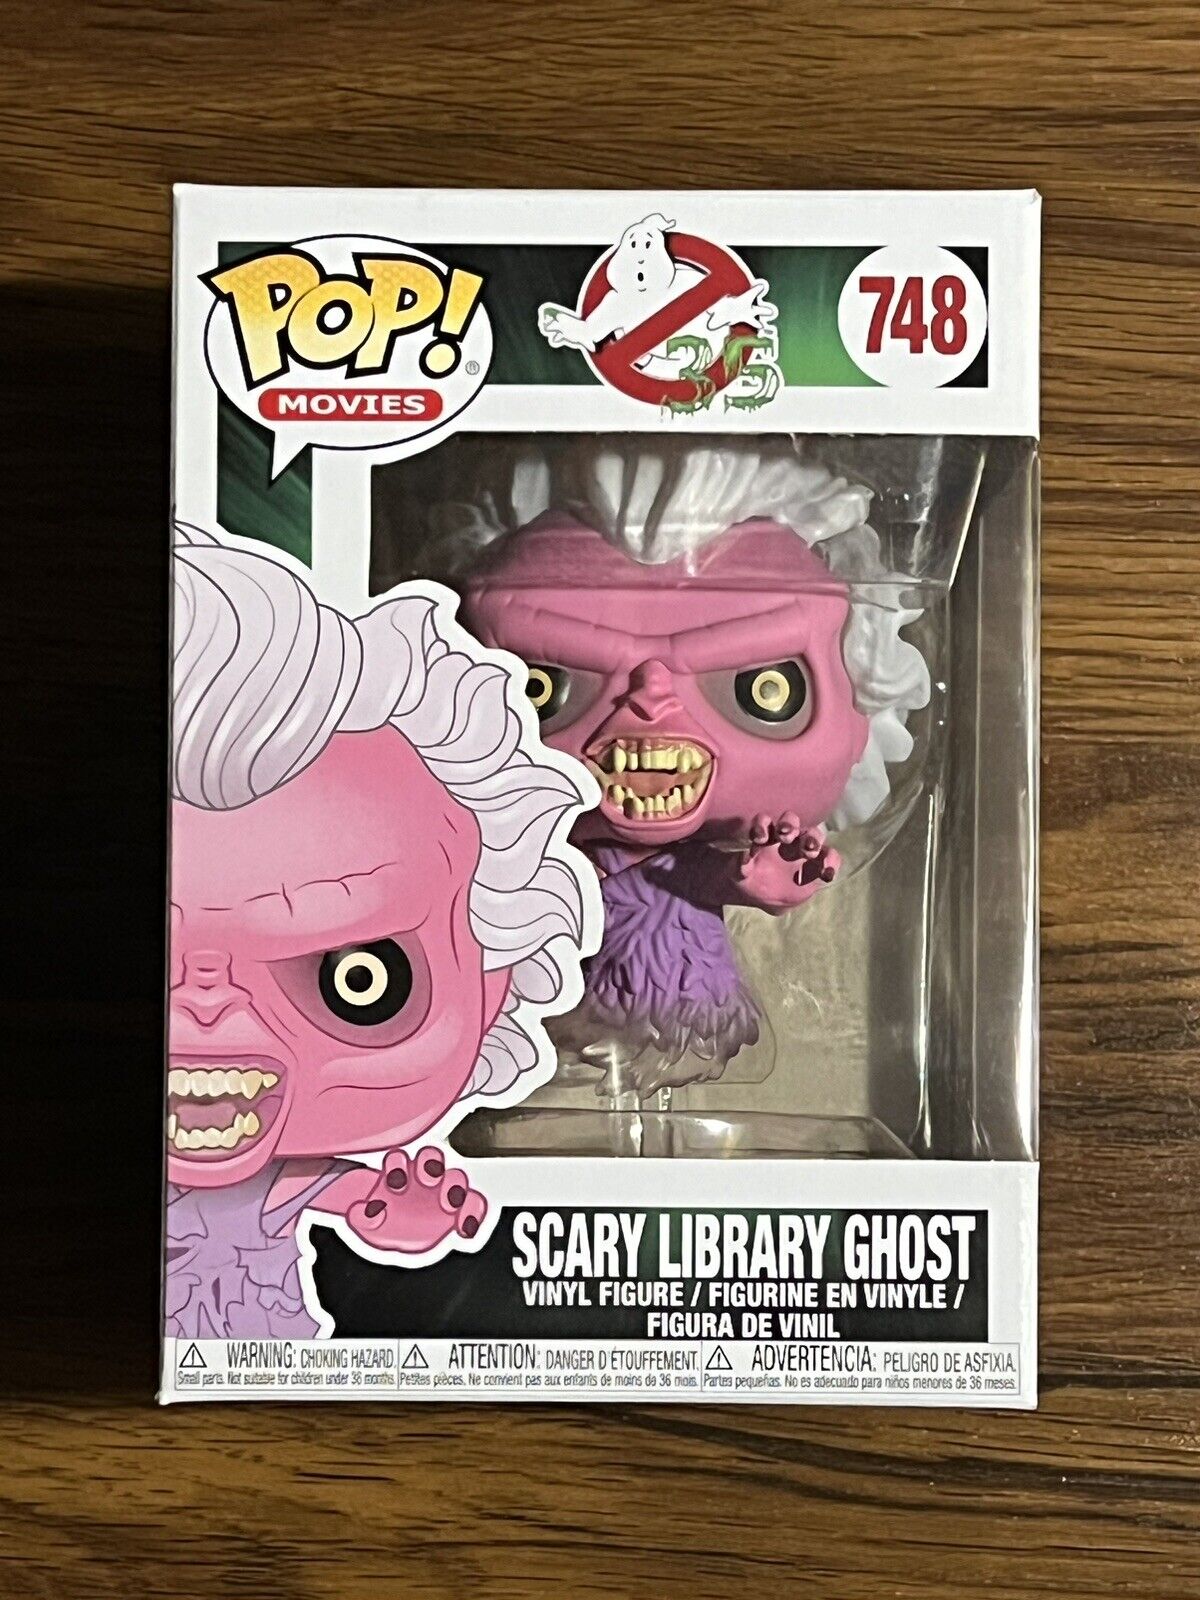 Ghostbusters - Scary Library Ghost # 748 - Funko Pop Movies